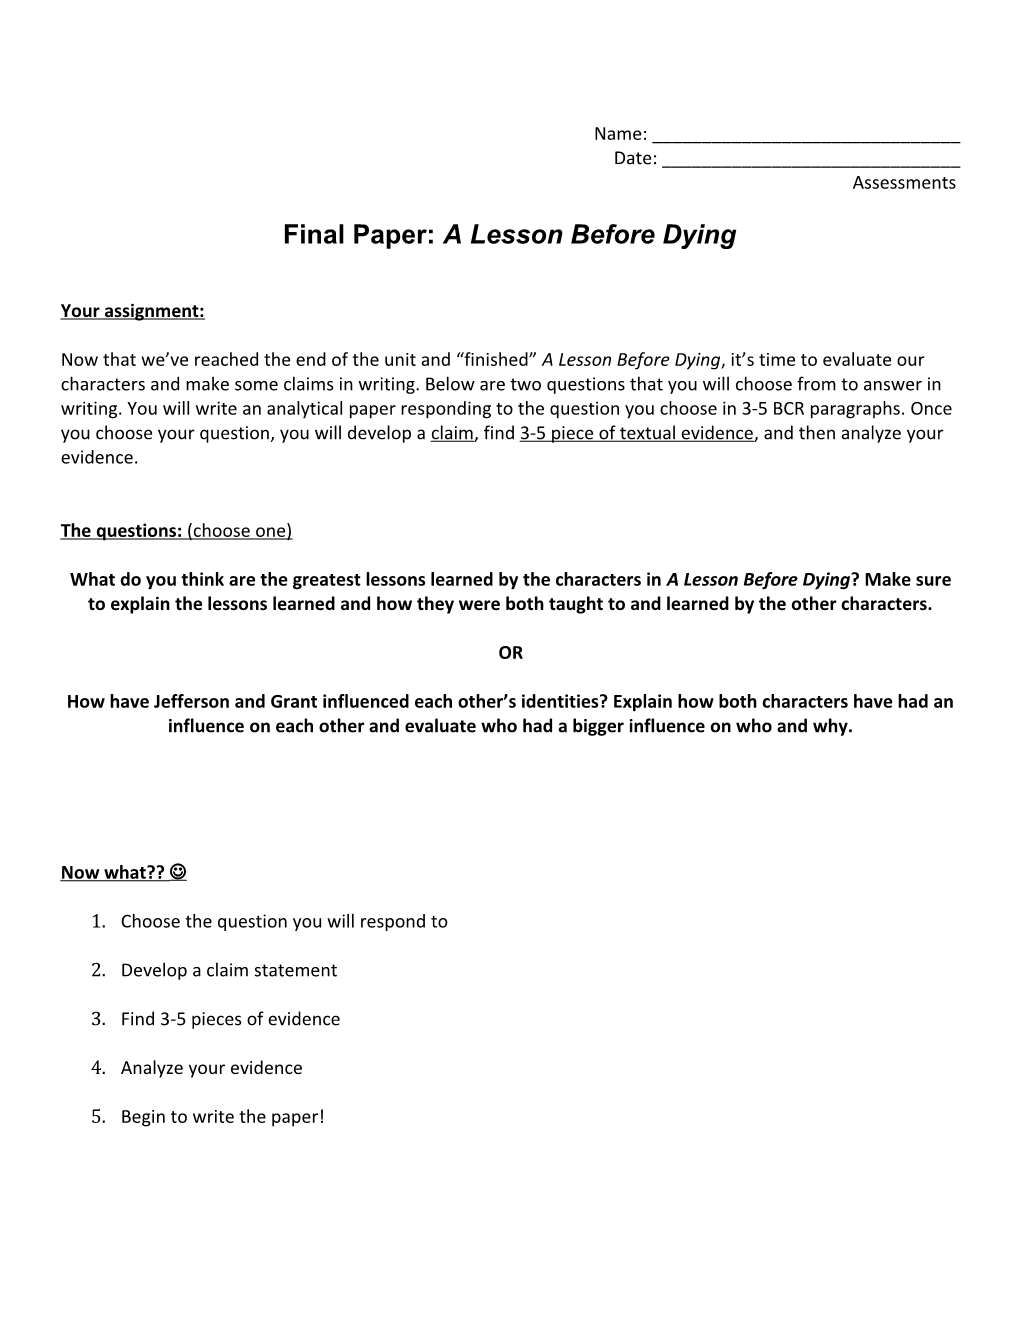 Final Paper: a Lesson Before Dying